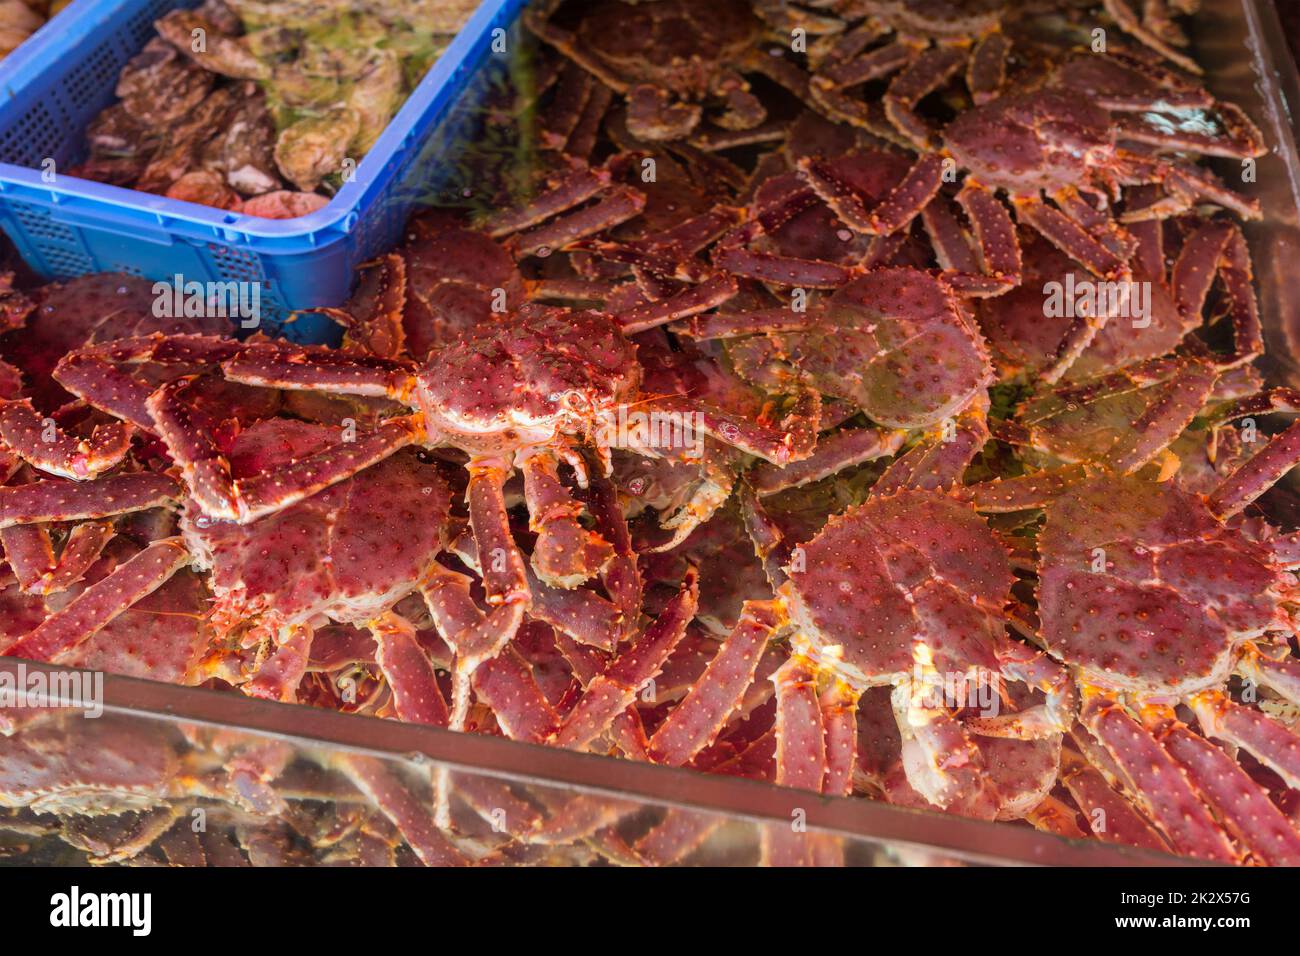 Live Japanese king crabs in market Stock Photo